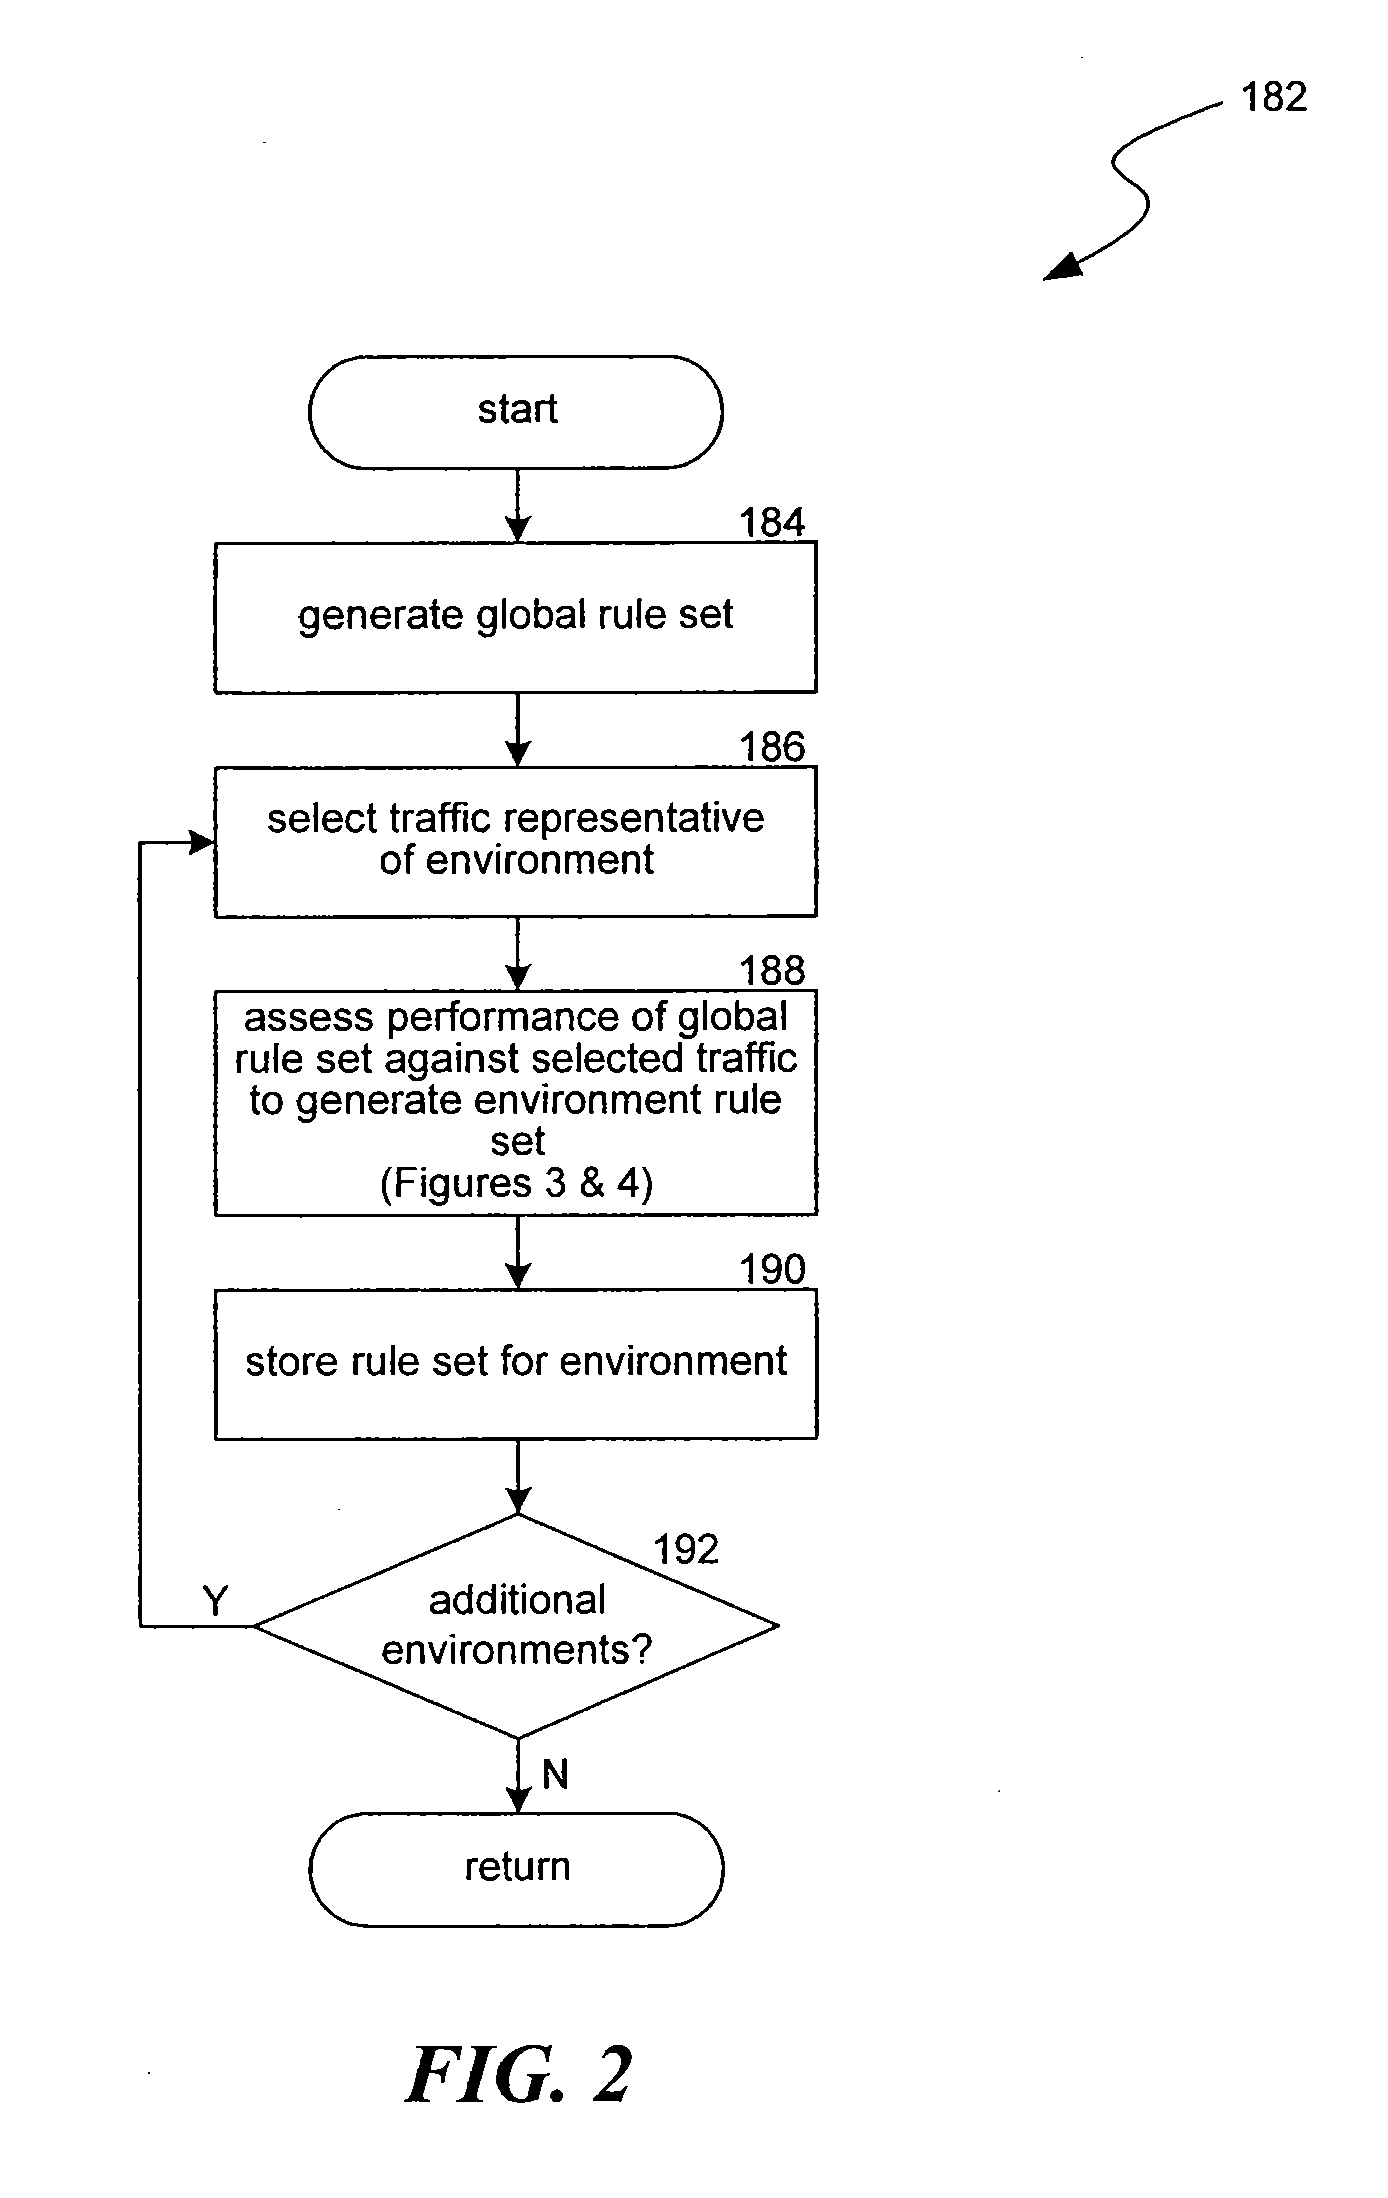 Method and system for scoring quality of traffic to network sites